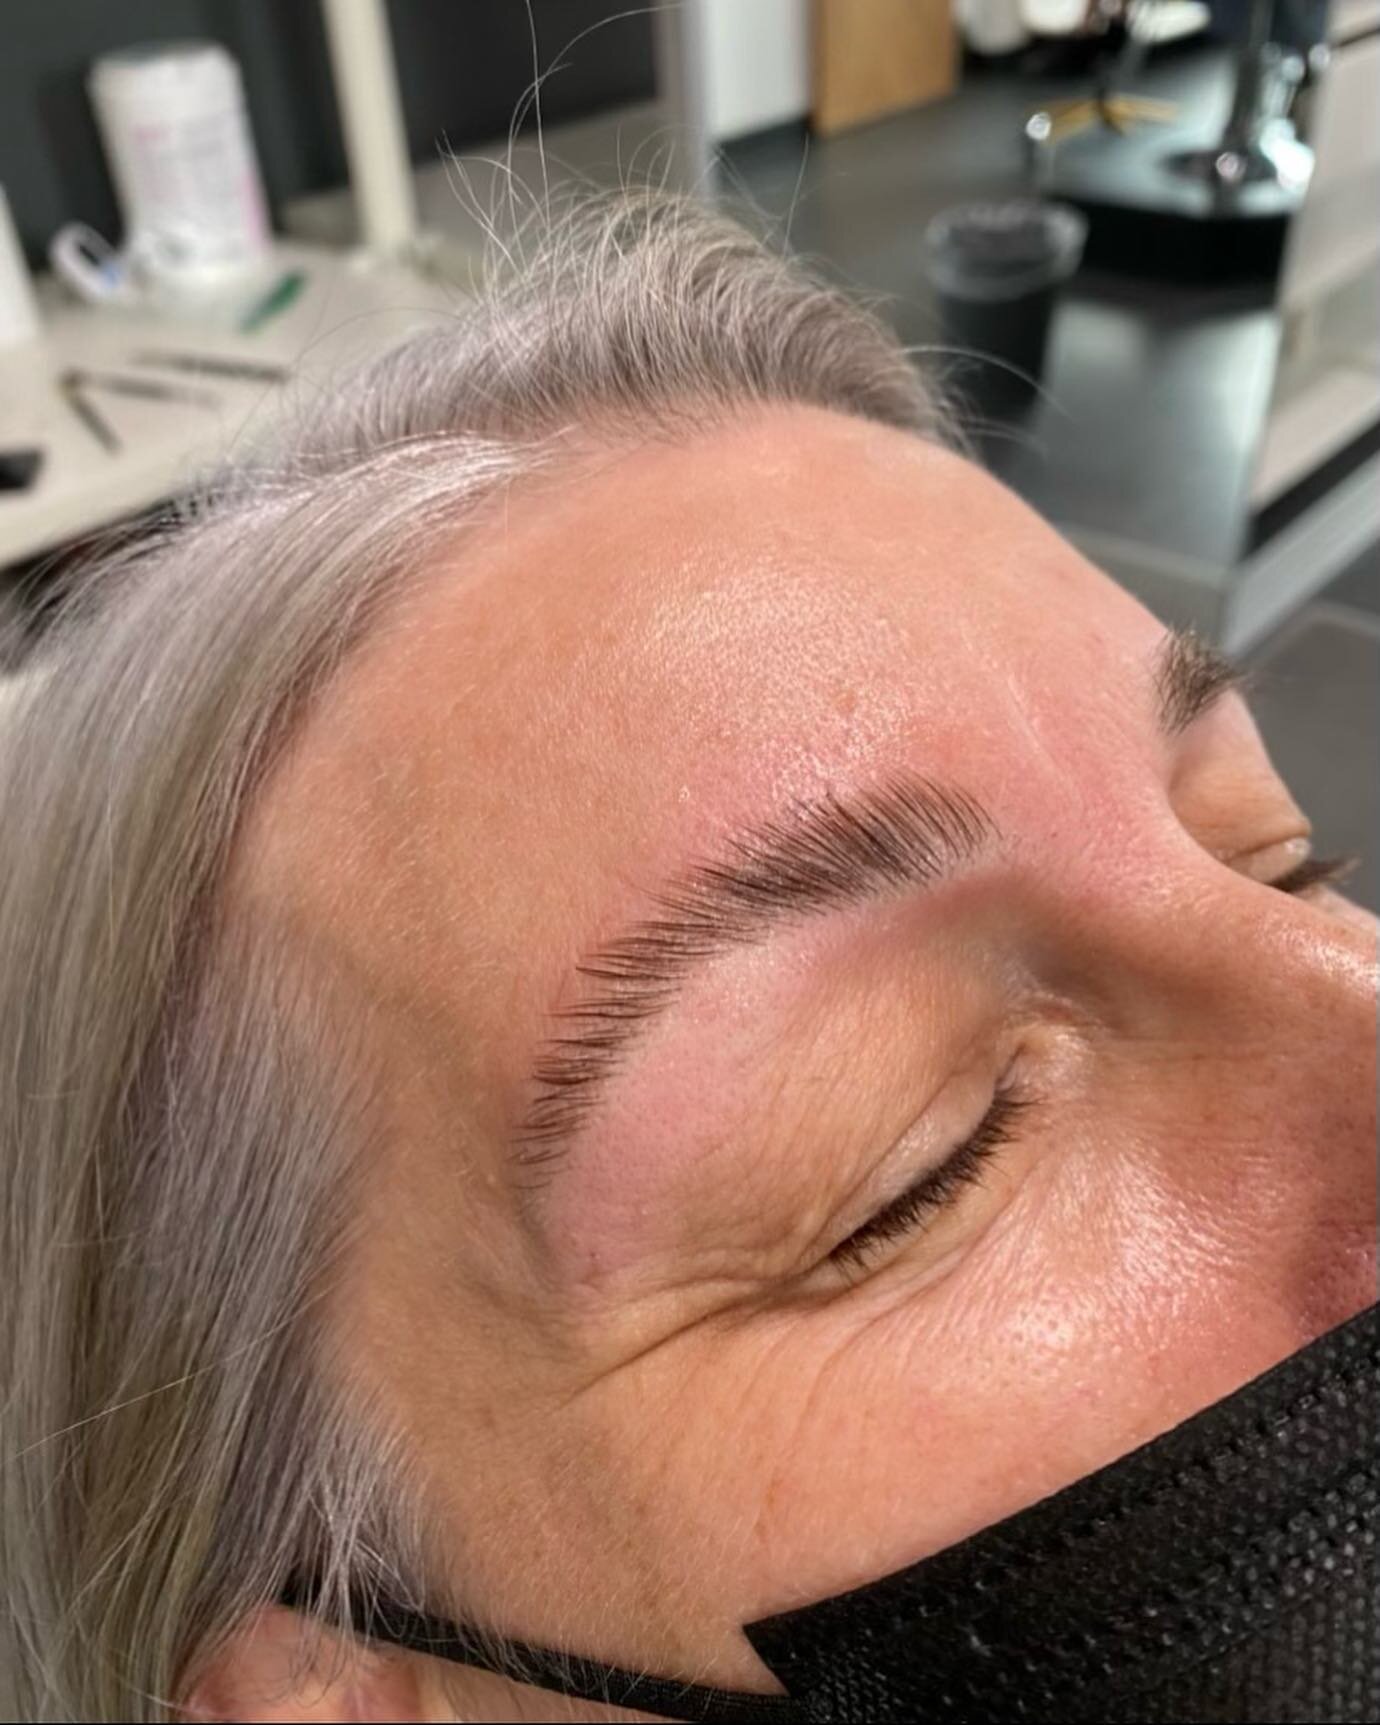 Swipe to see the 🐝fore! 😍 #browzbysierra #browlamination 
Z
Z
Z
z
z
z
z
#thebrowhive #browsfromthehive #browhive #brows #utahbrows #browbar #browstudio #utahbrowstudio #utahbrowbar #browshaping #eyebrowshaping #browshapingspecialists #eyebrows  #sl